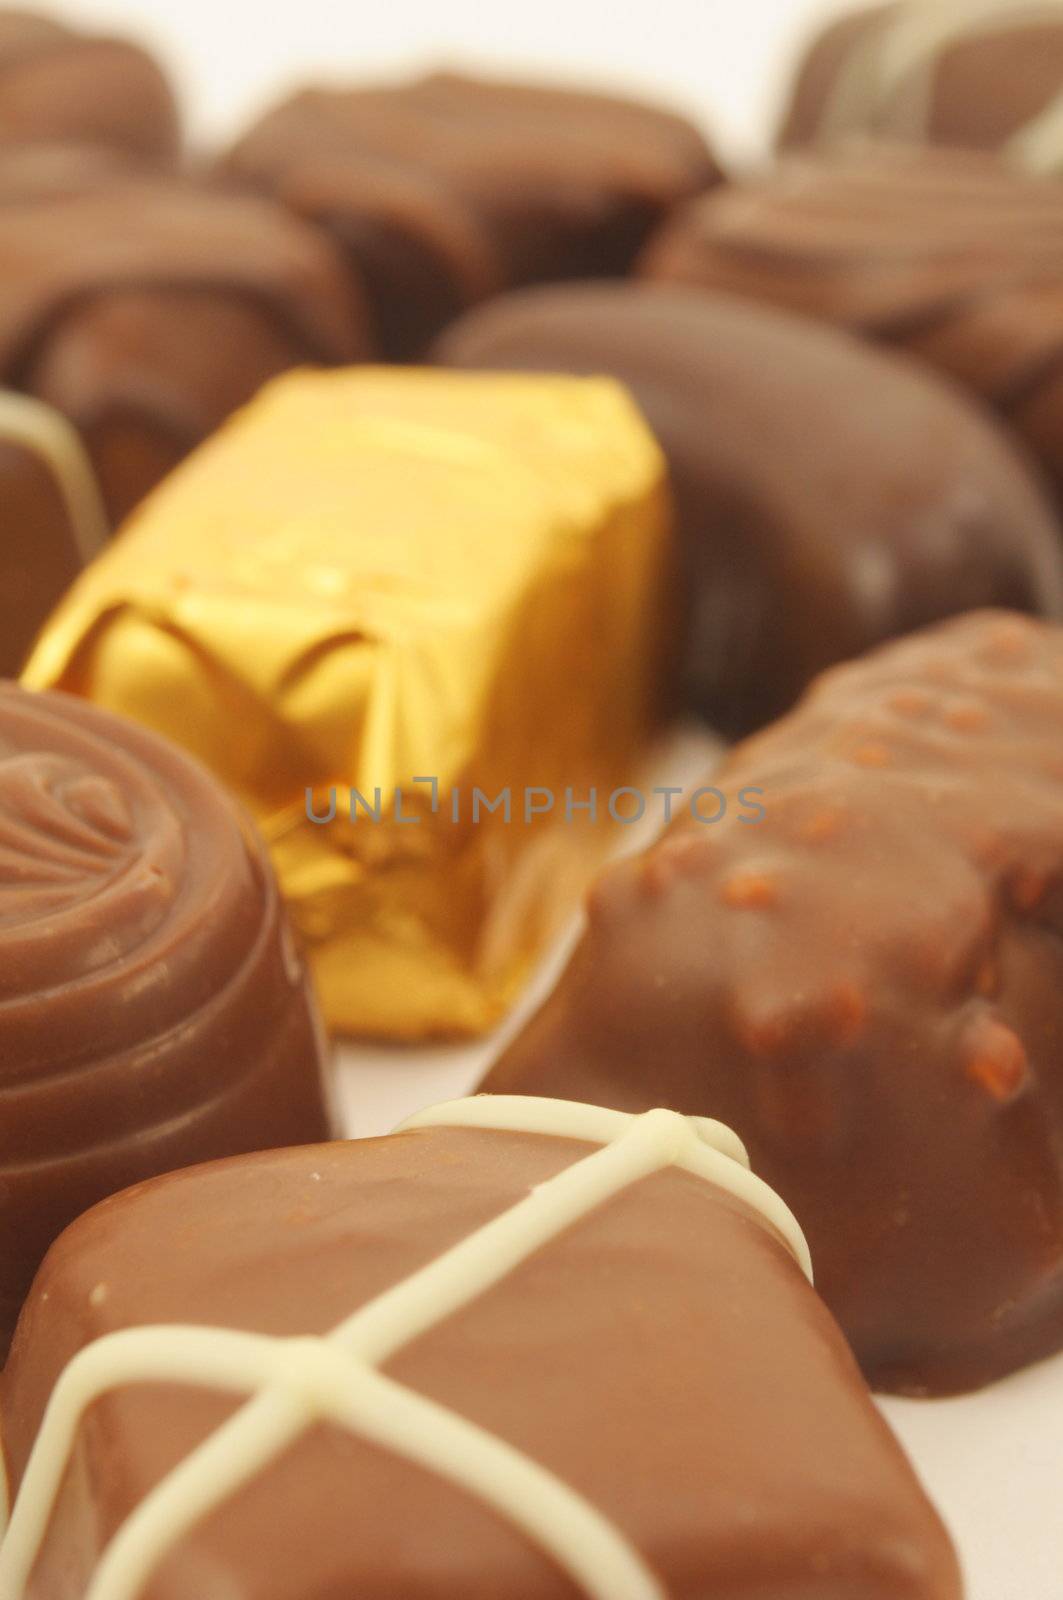 some sweet praline for valentines day or xmas present